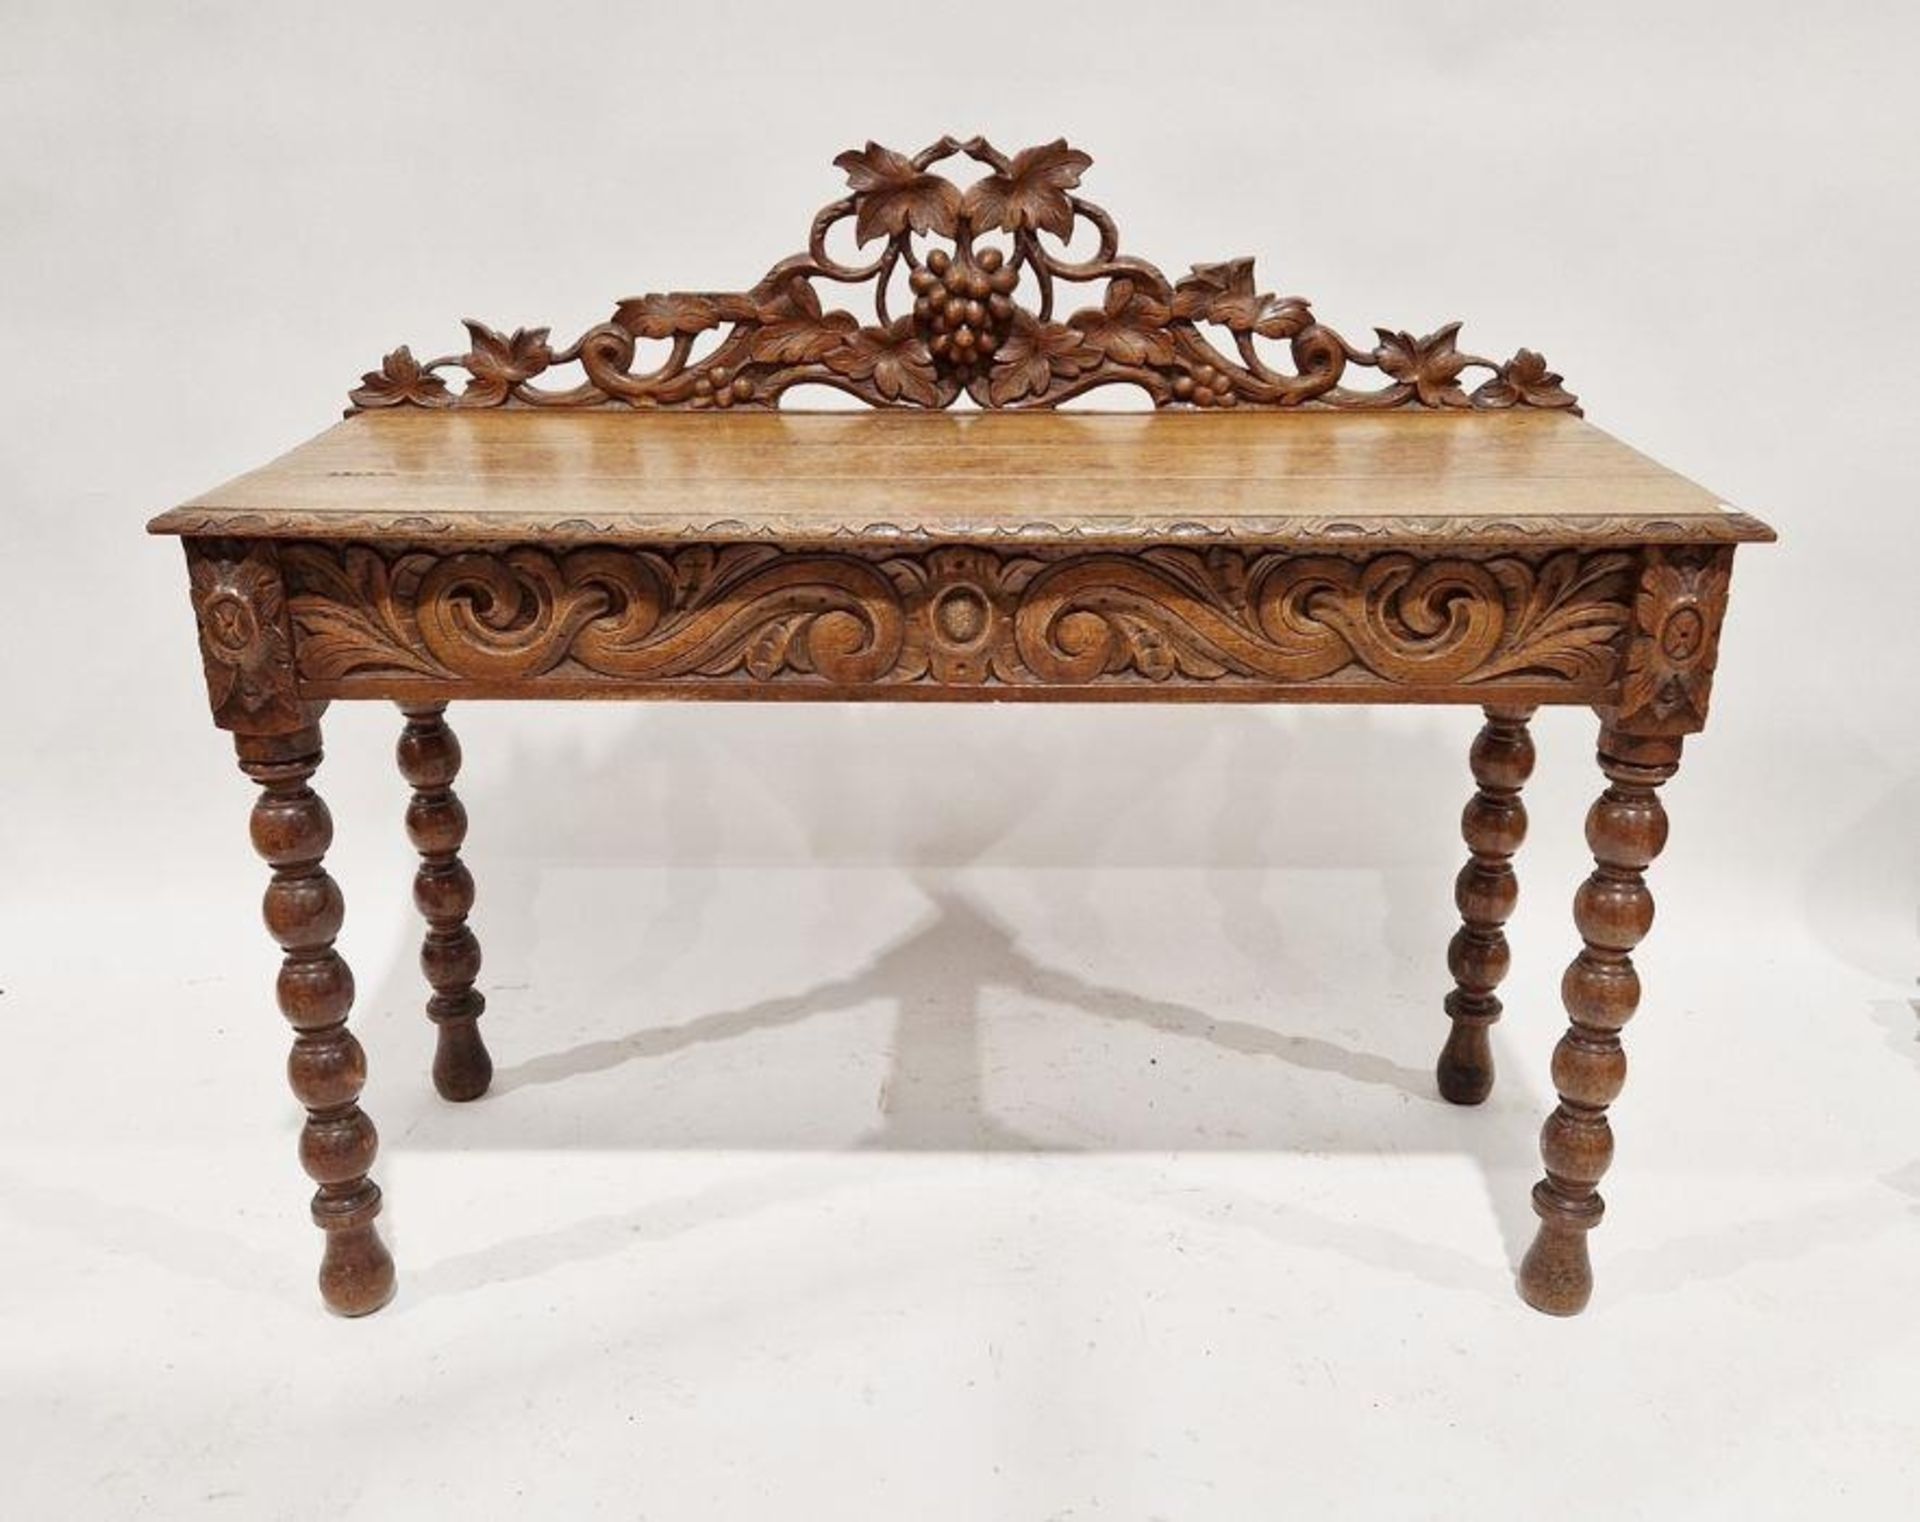 Console Table  Mid 19th Century Scottish, Oak With Carved Decoration, This Side Table Dates To Circa - Image 2 of 2